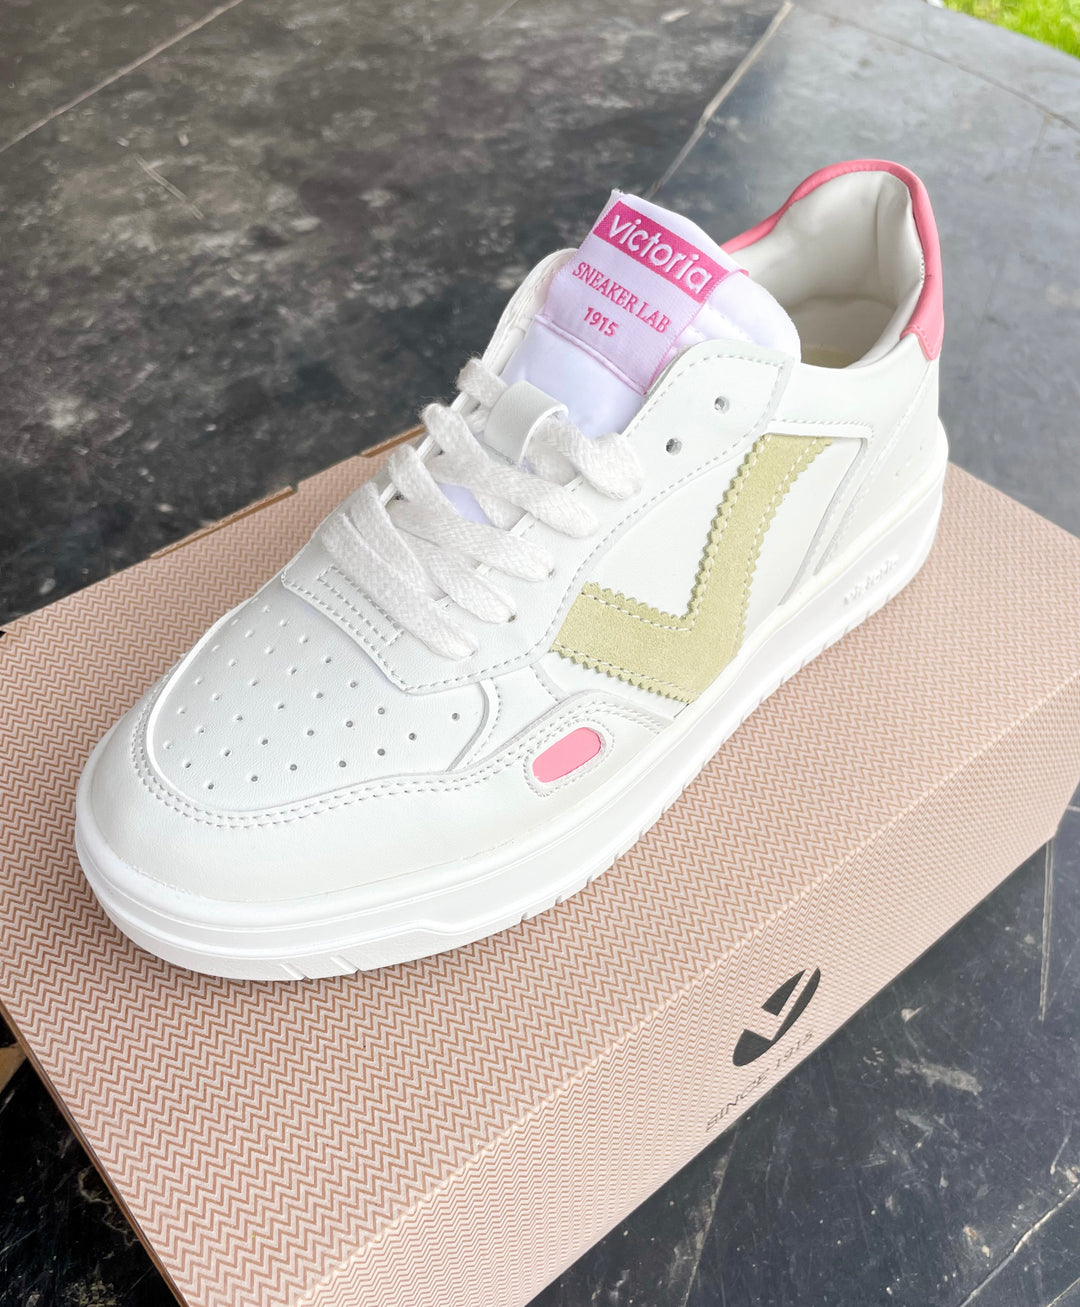 The Victoria Seul Sneakers